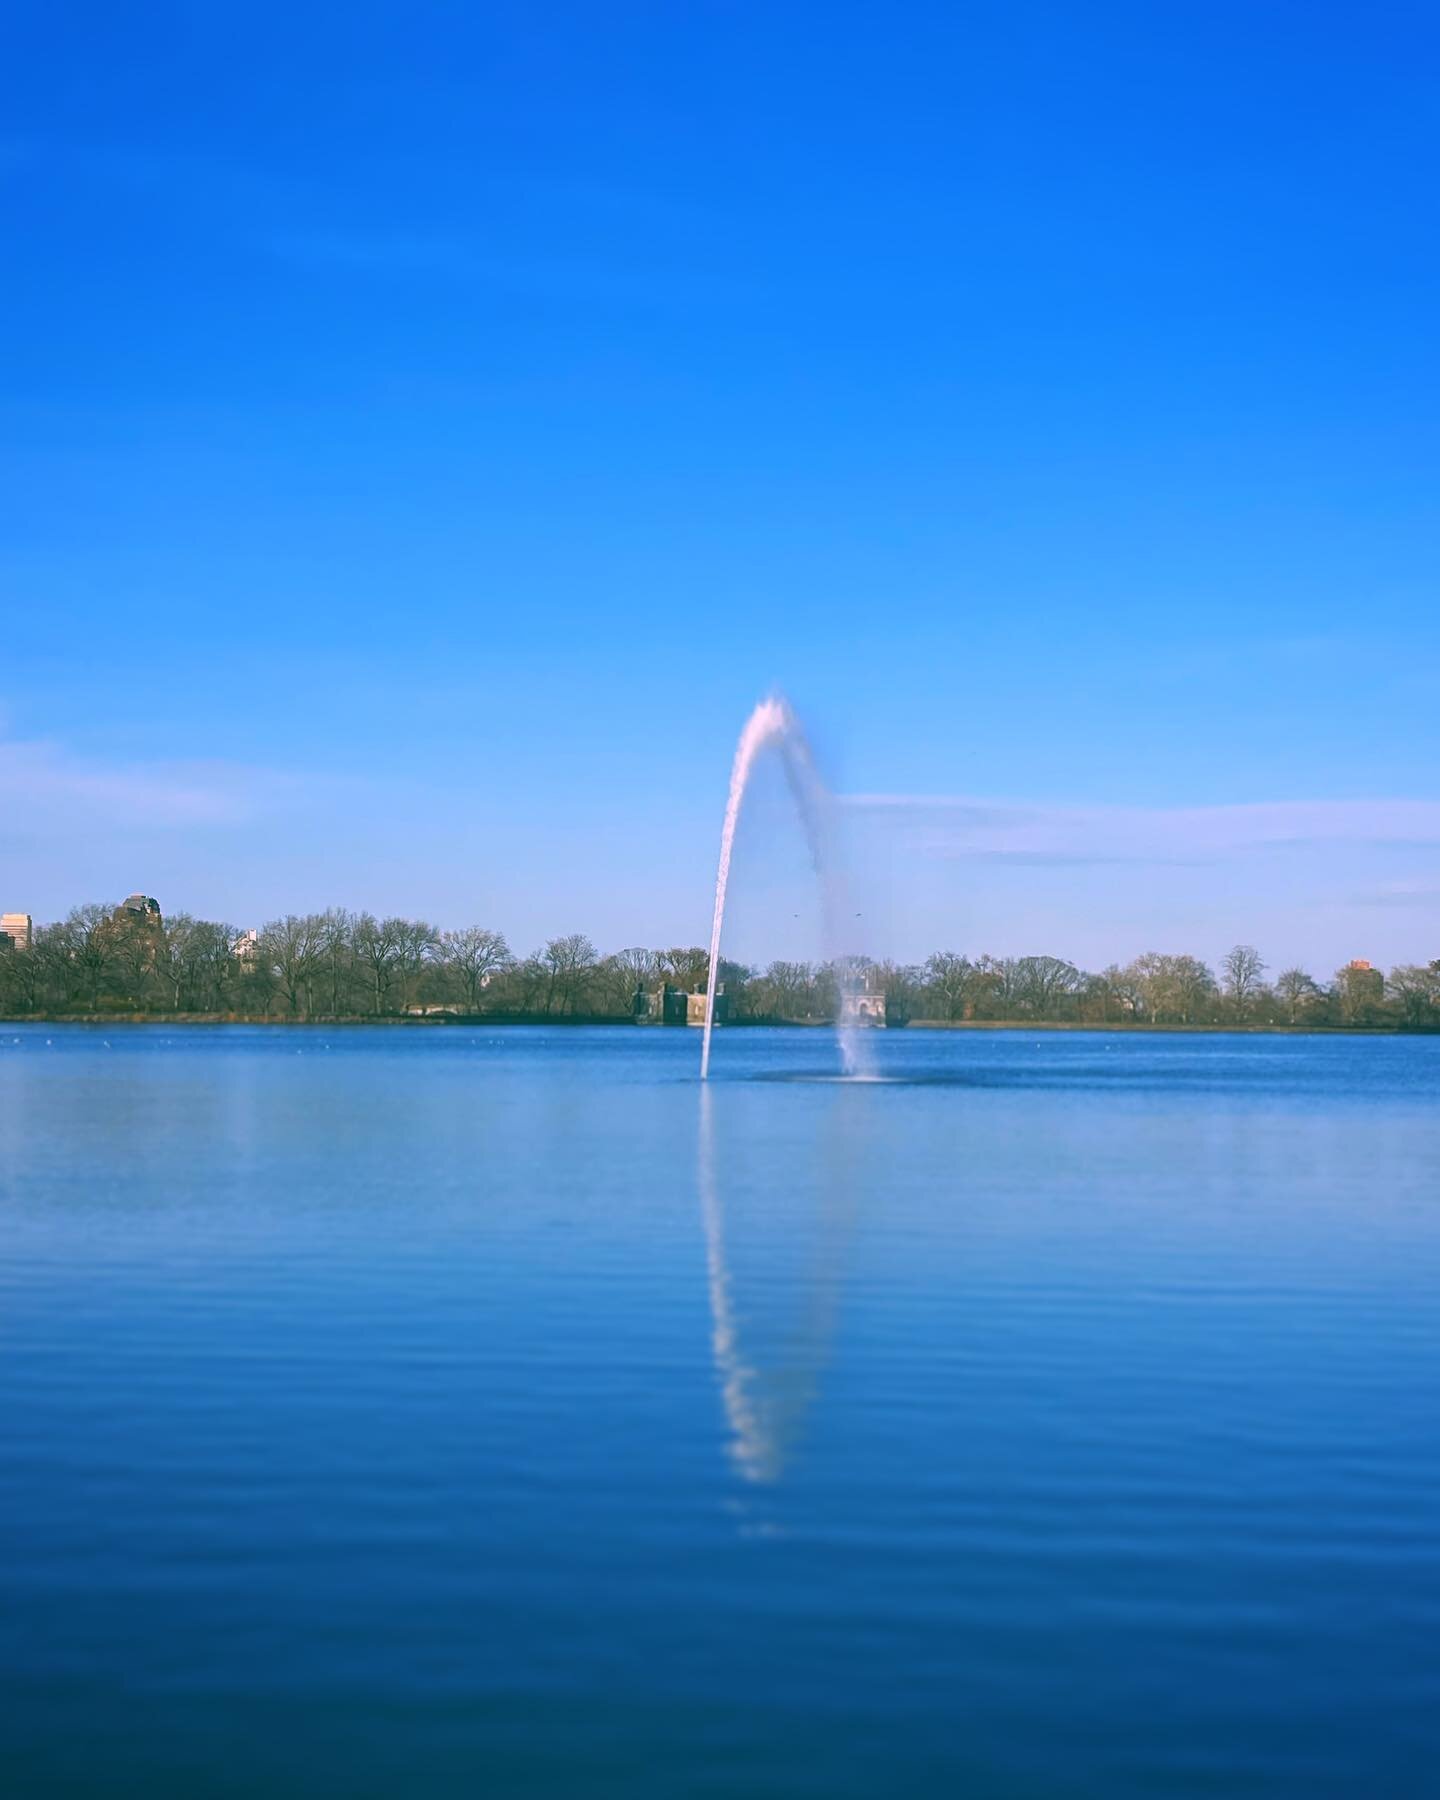 The spout

📷 iPhone 11 - March 2023

#photography #lake #reservoir #fountain #water